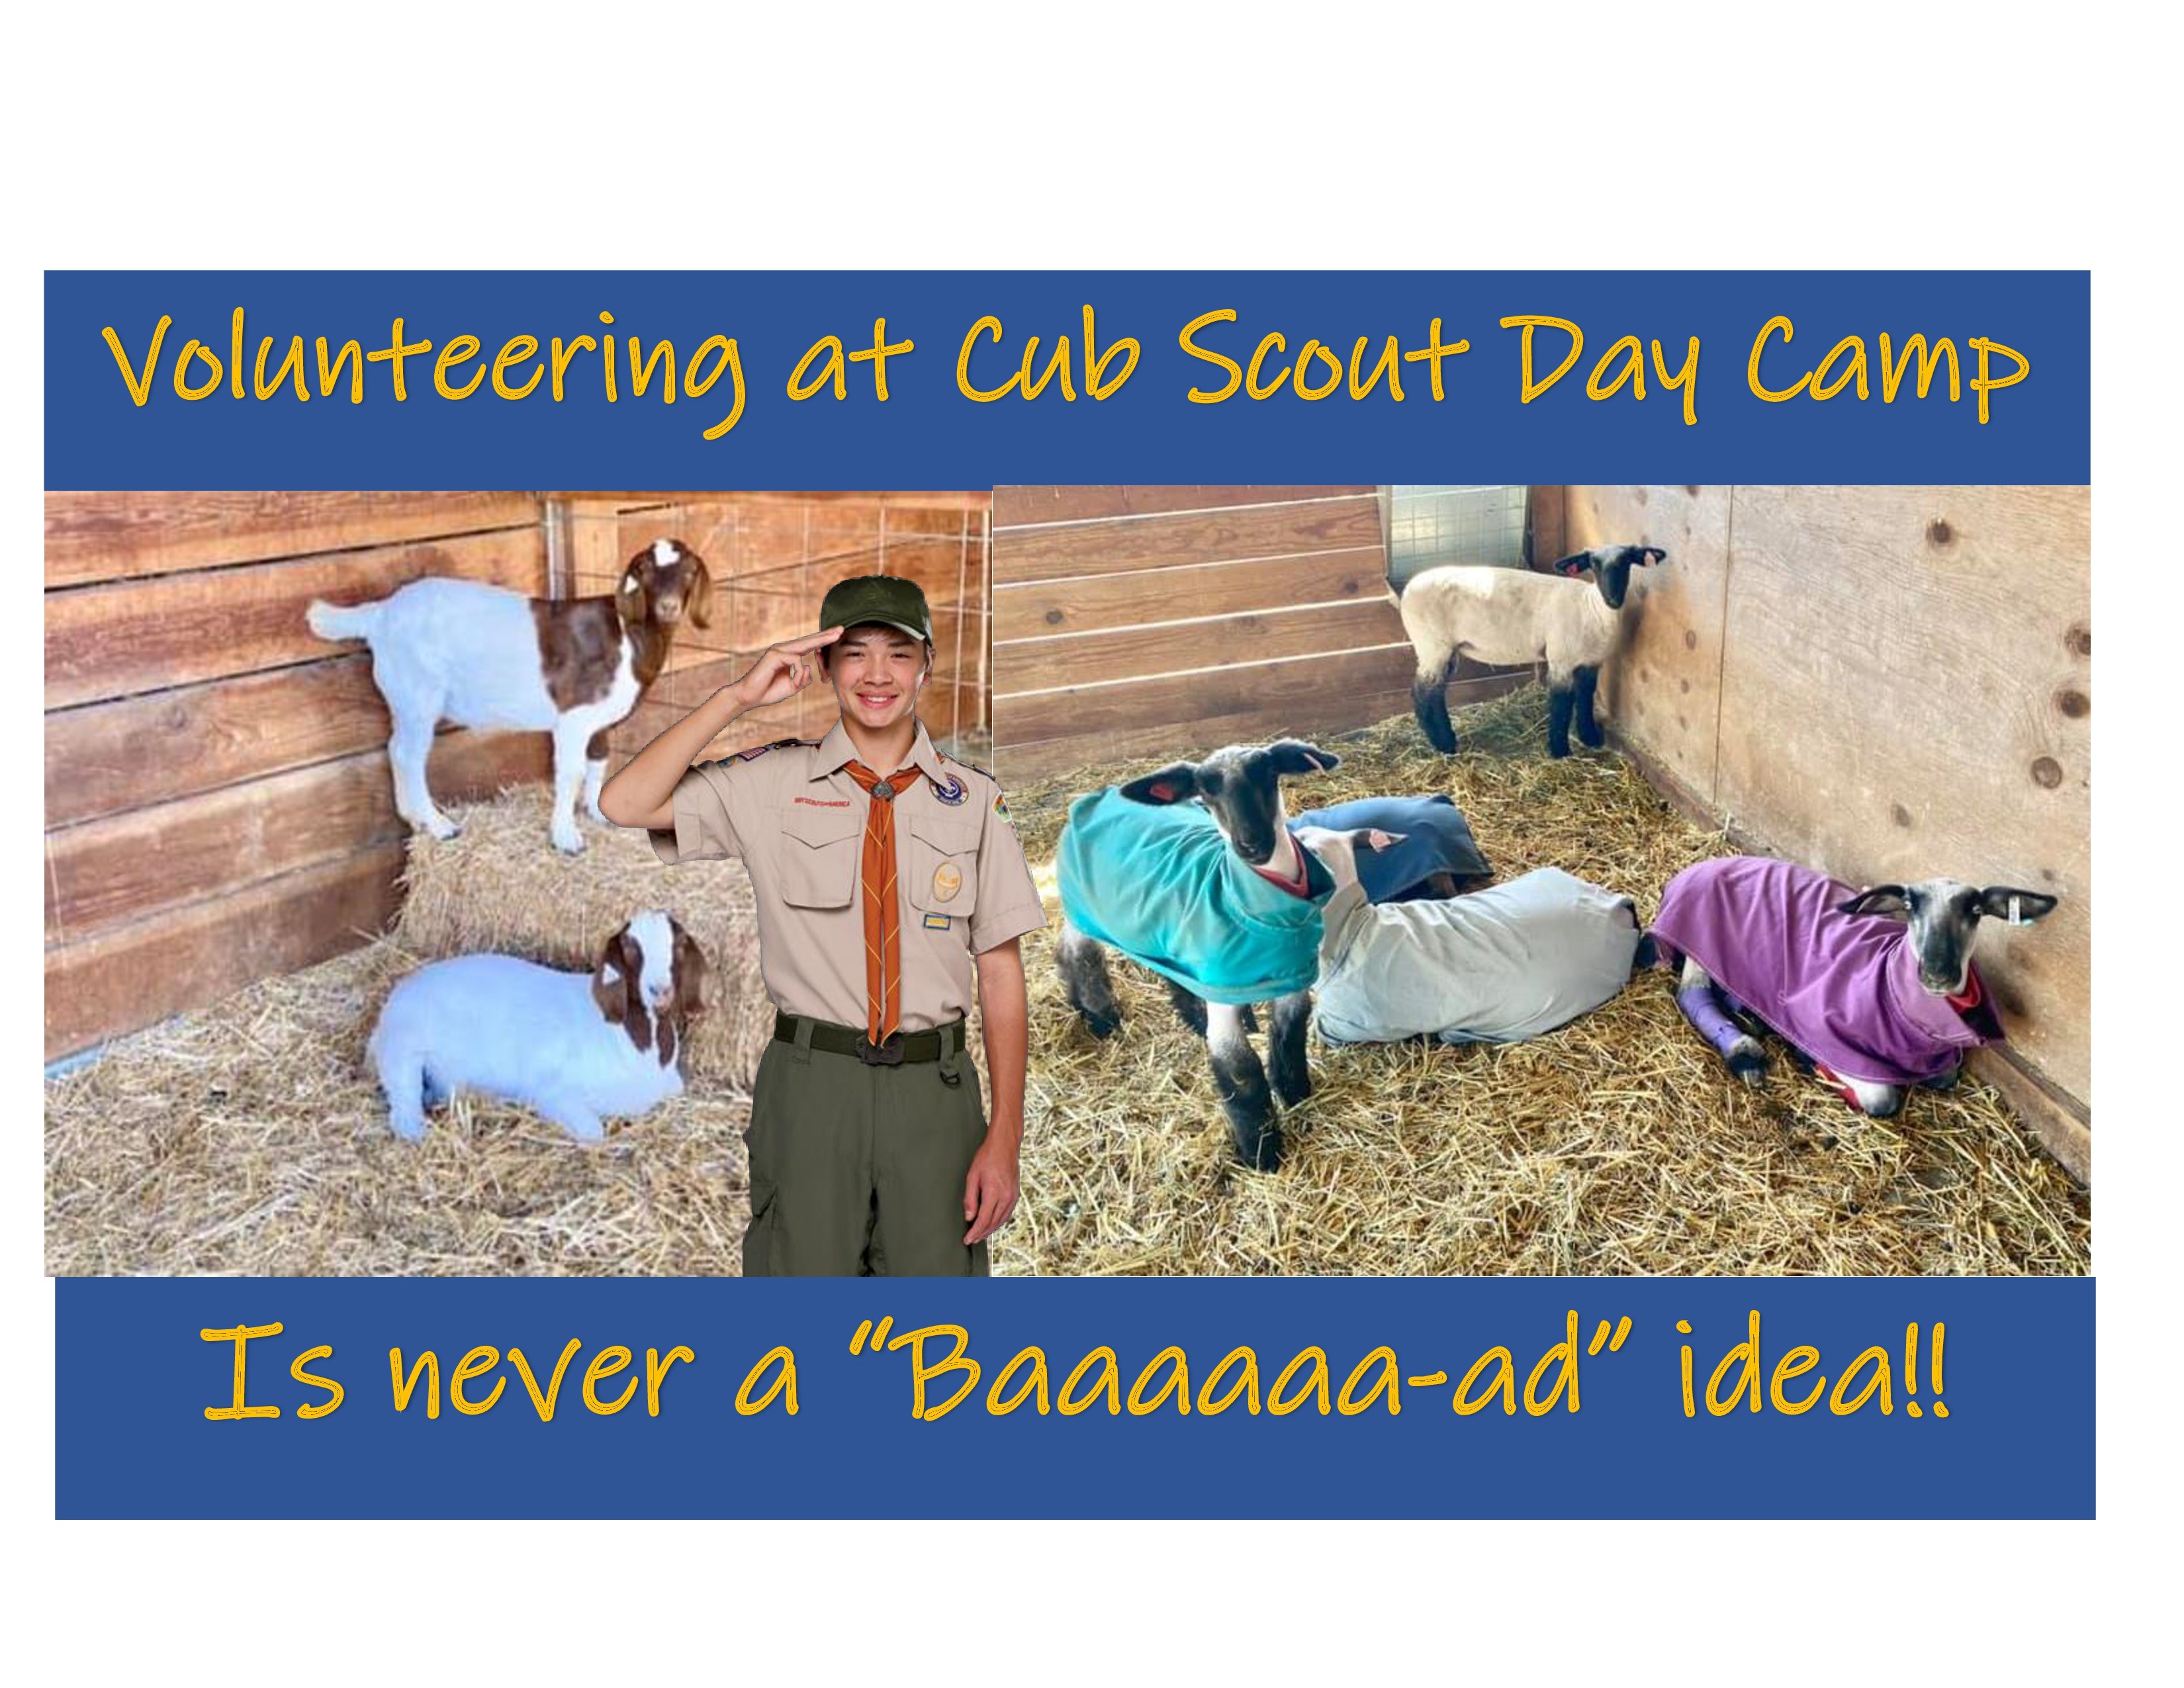 Volunteers are needed at the Cub Scout Day Camp!